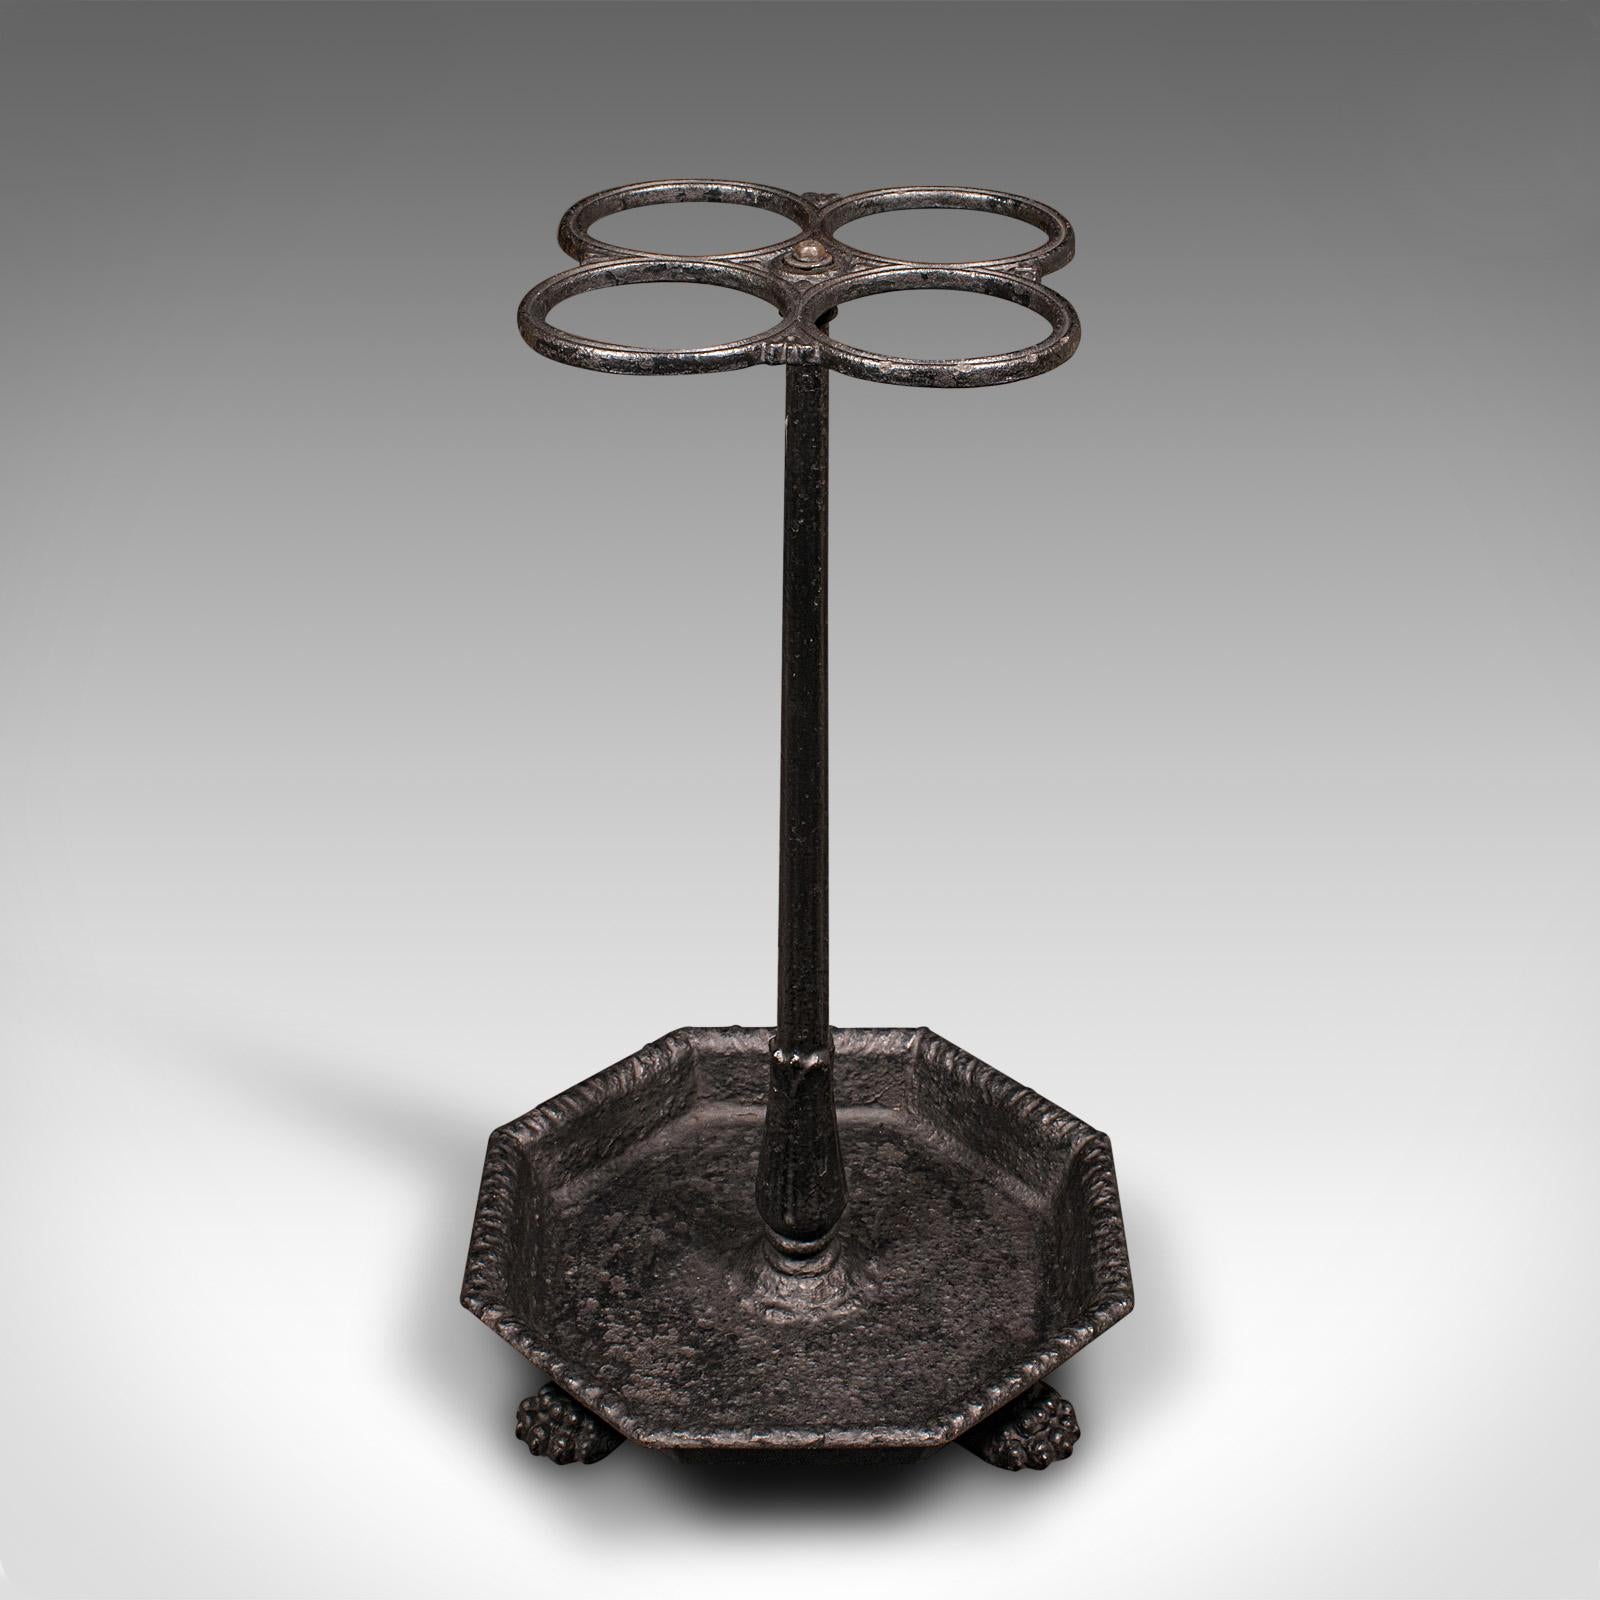 This is an antique four division umbrella rack. An English, cast iron hallway stick stand, dating to the Georgian period, circa 1800.

Appealing spherical form a distinctive treat for the reception hall
Displays a desirable aged patina and in good